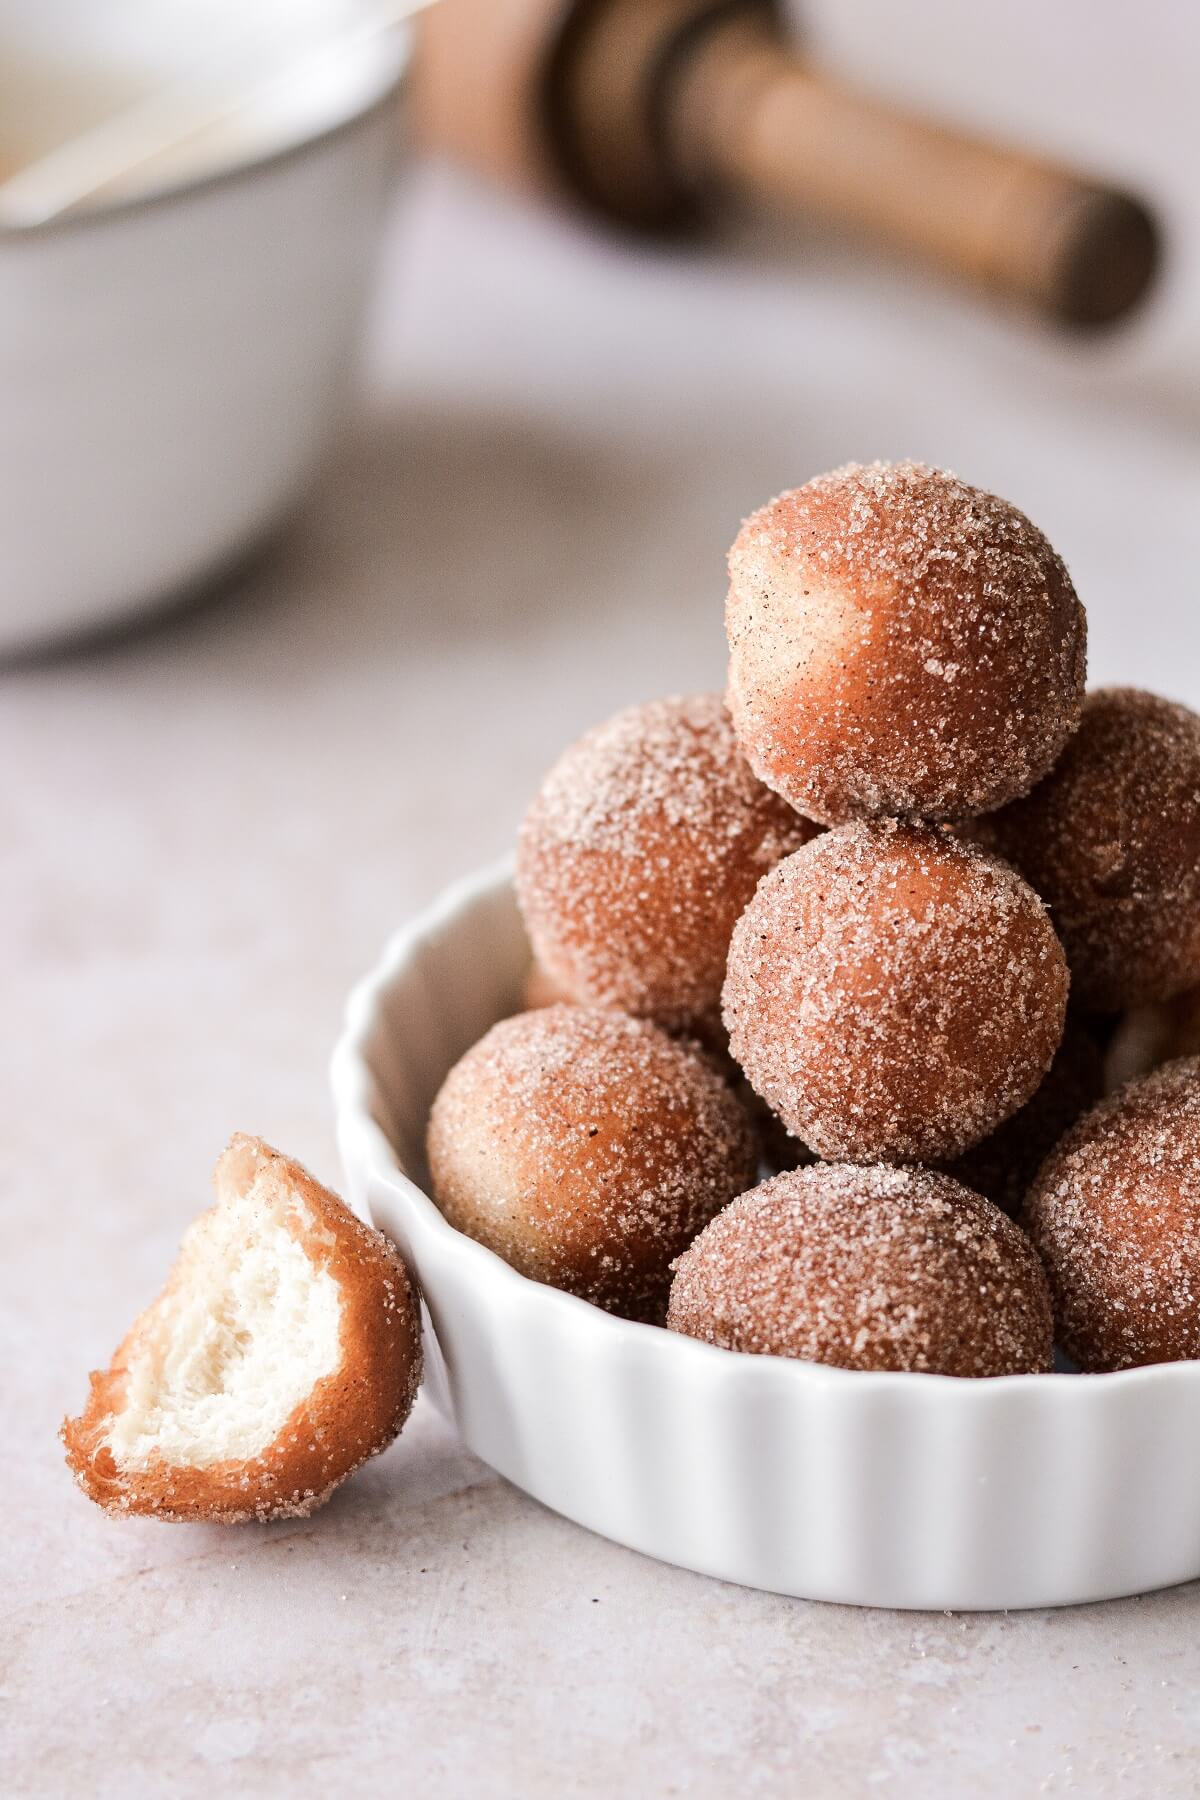 Doughnut holes coated in cinnamon sugar, one with a bite taken.